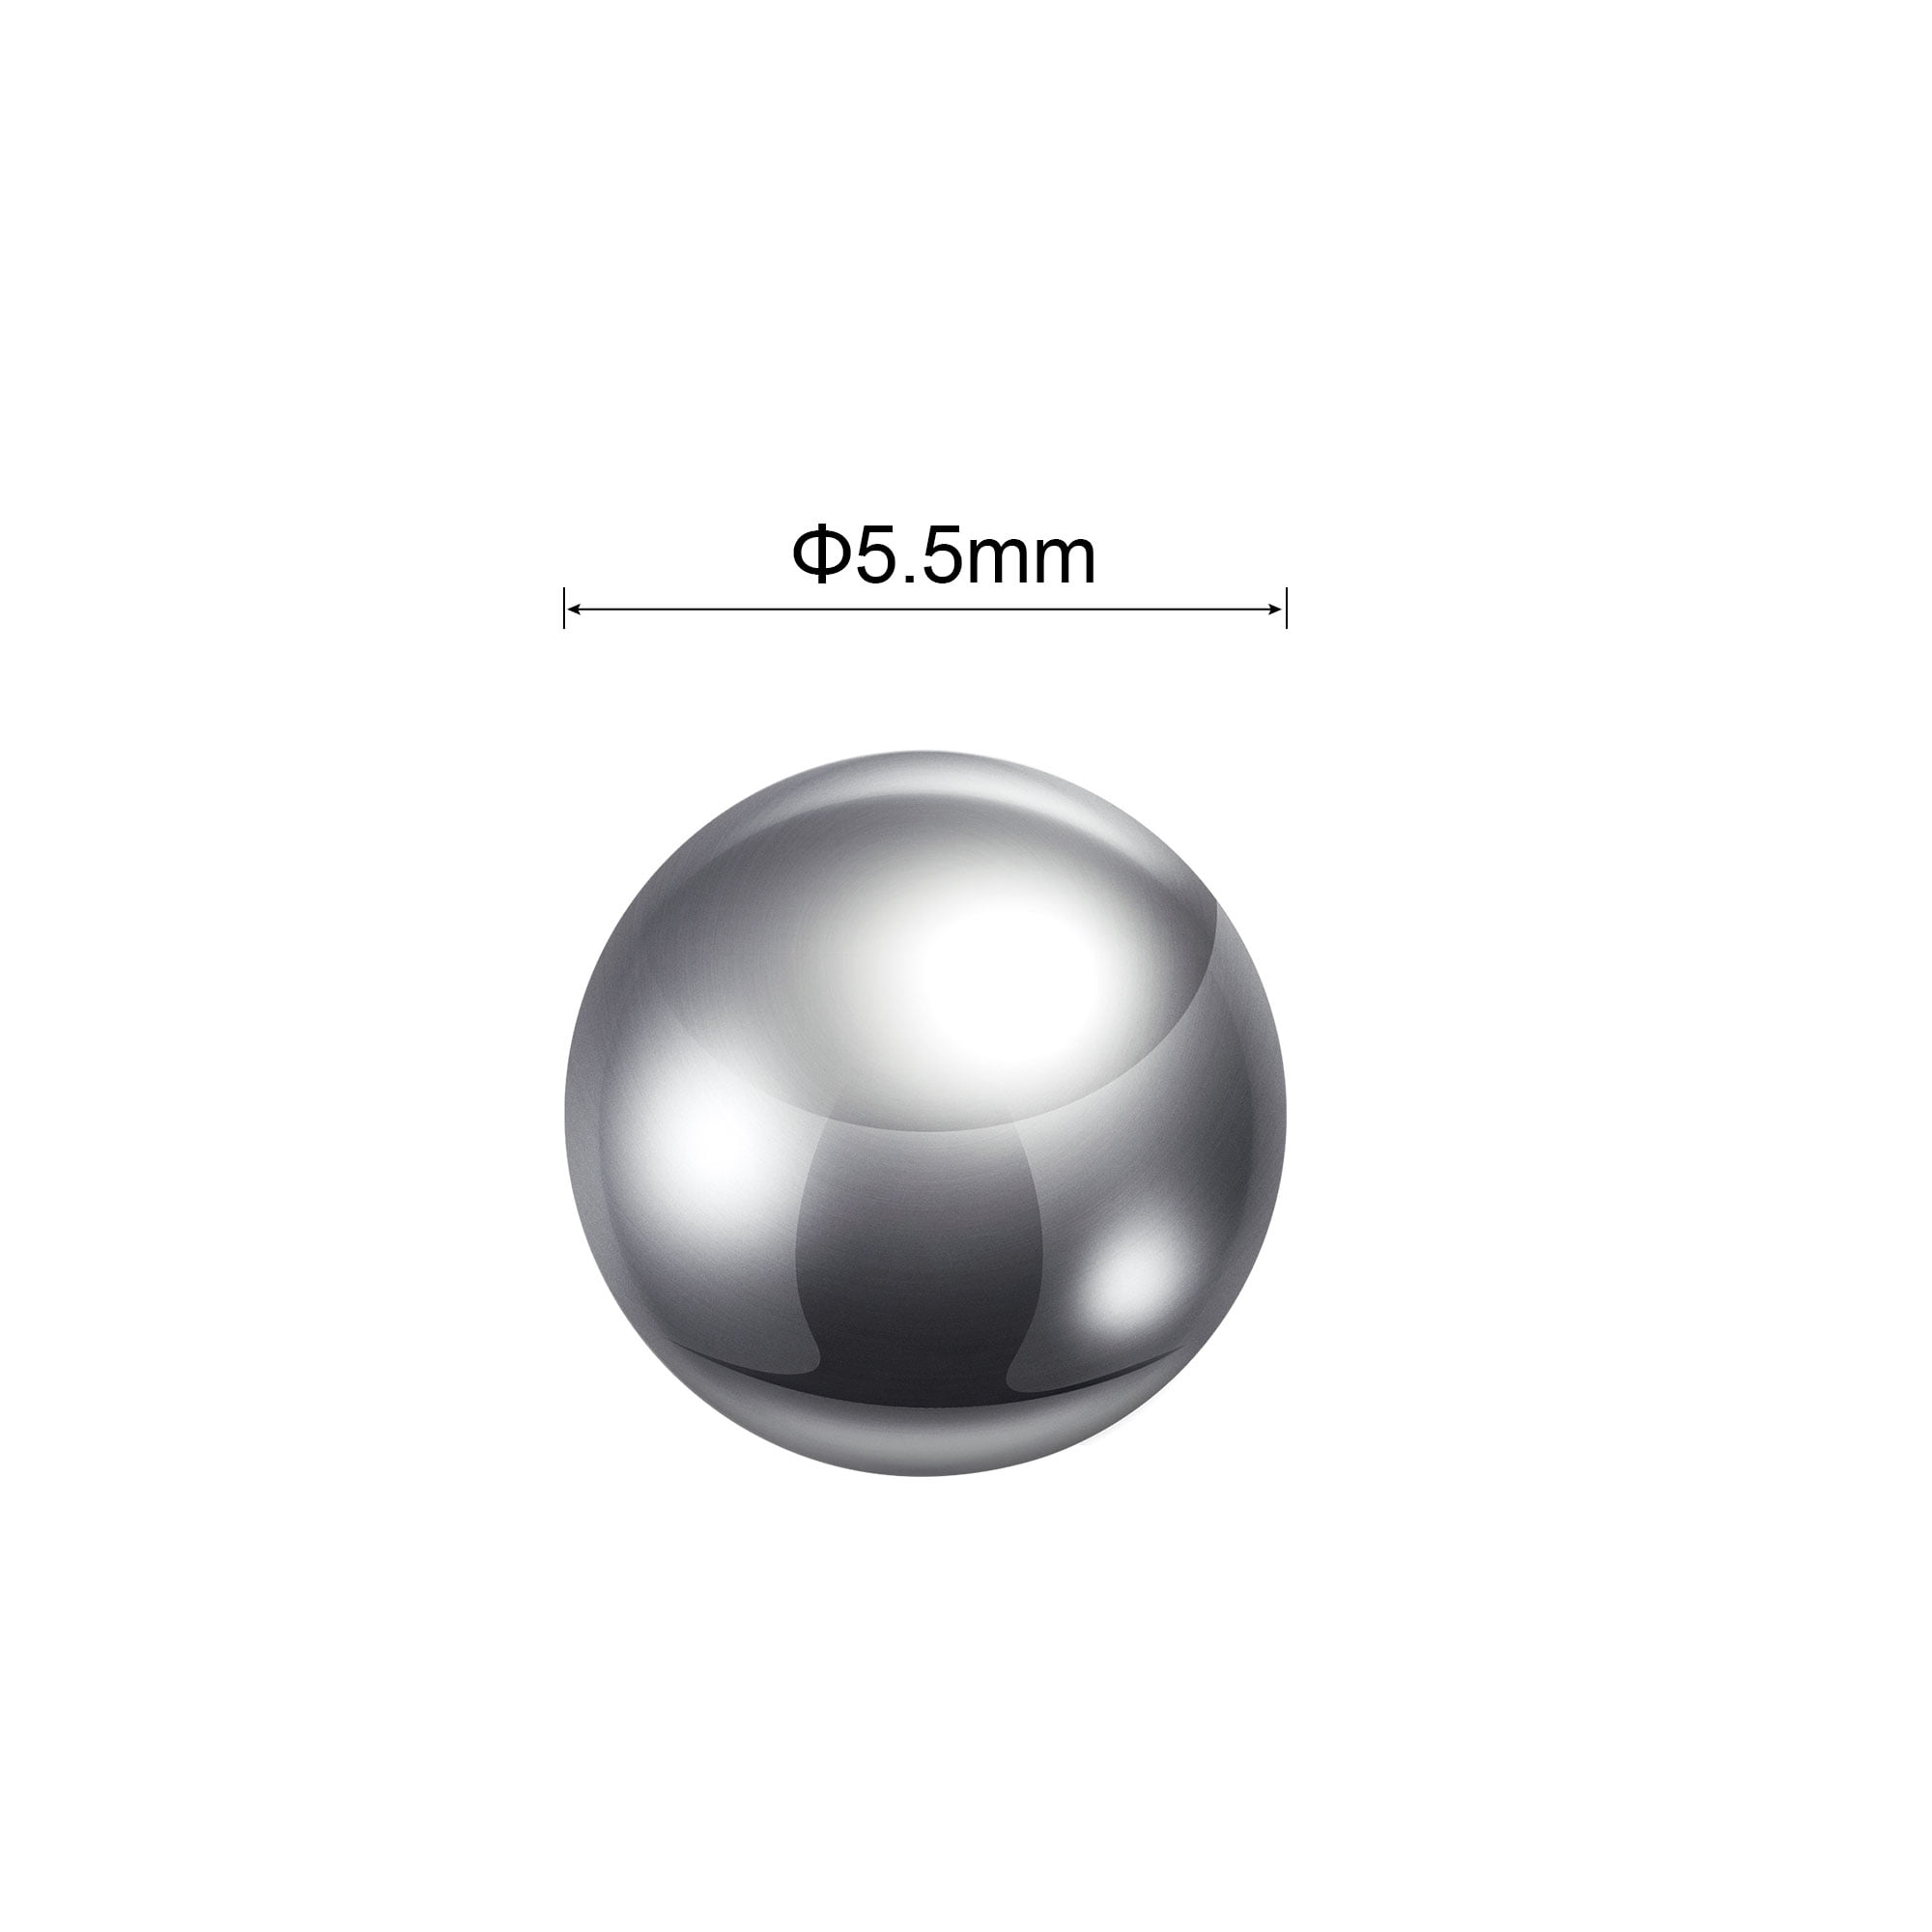 5mm Bearing Balls 304 Stainless Steel Precision Balls G100 200 Pieces 